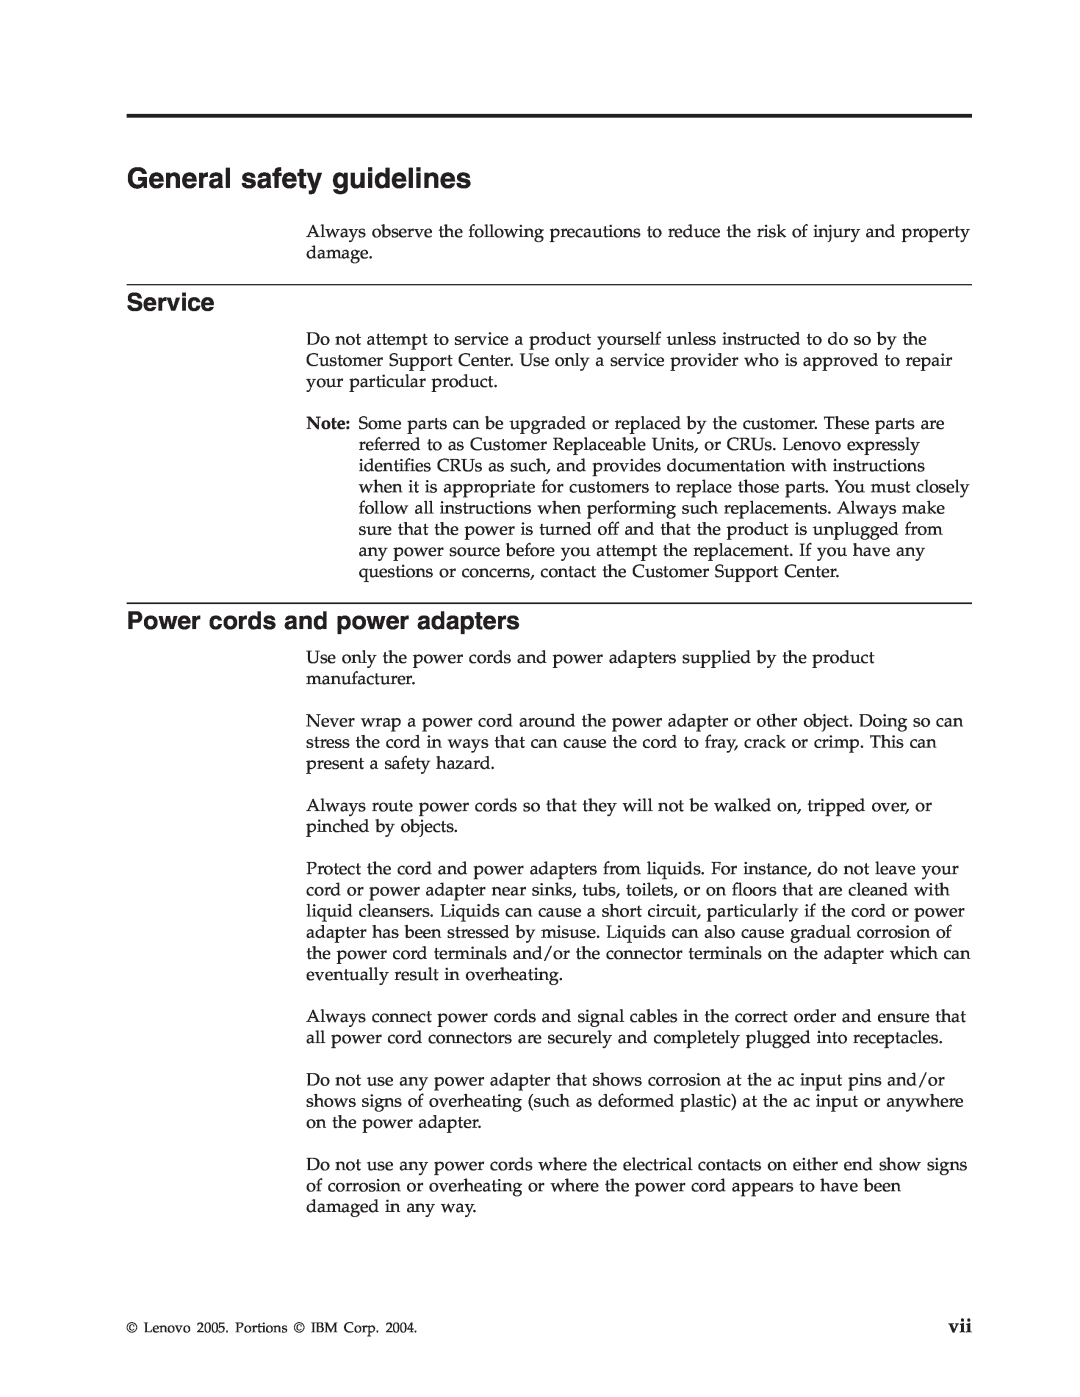 Lenovo C400 manual General safety guidelines, Service, Power cords and power adapters 